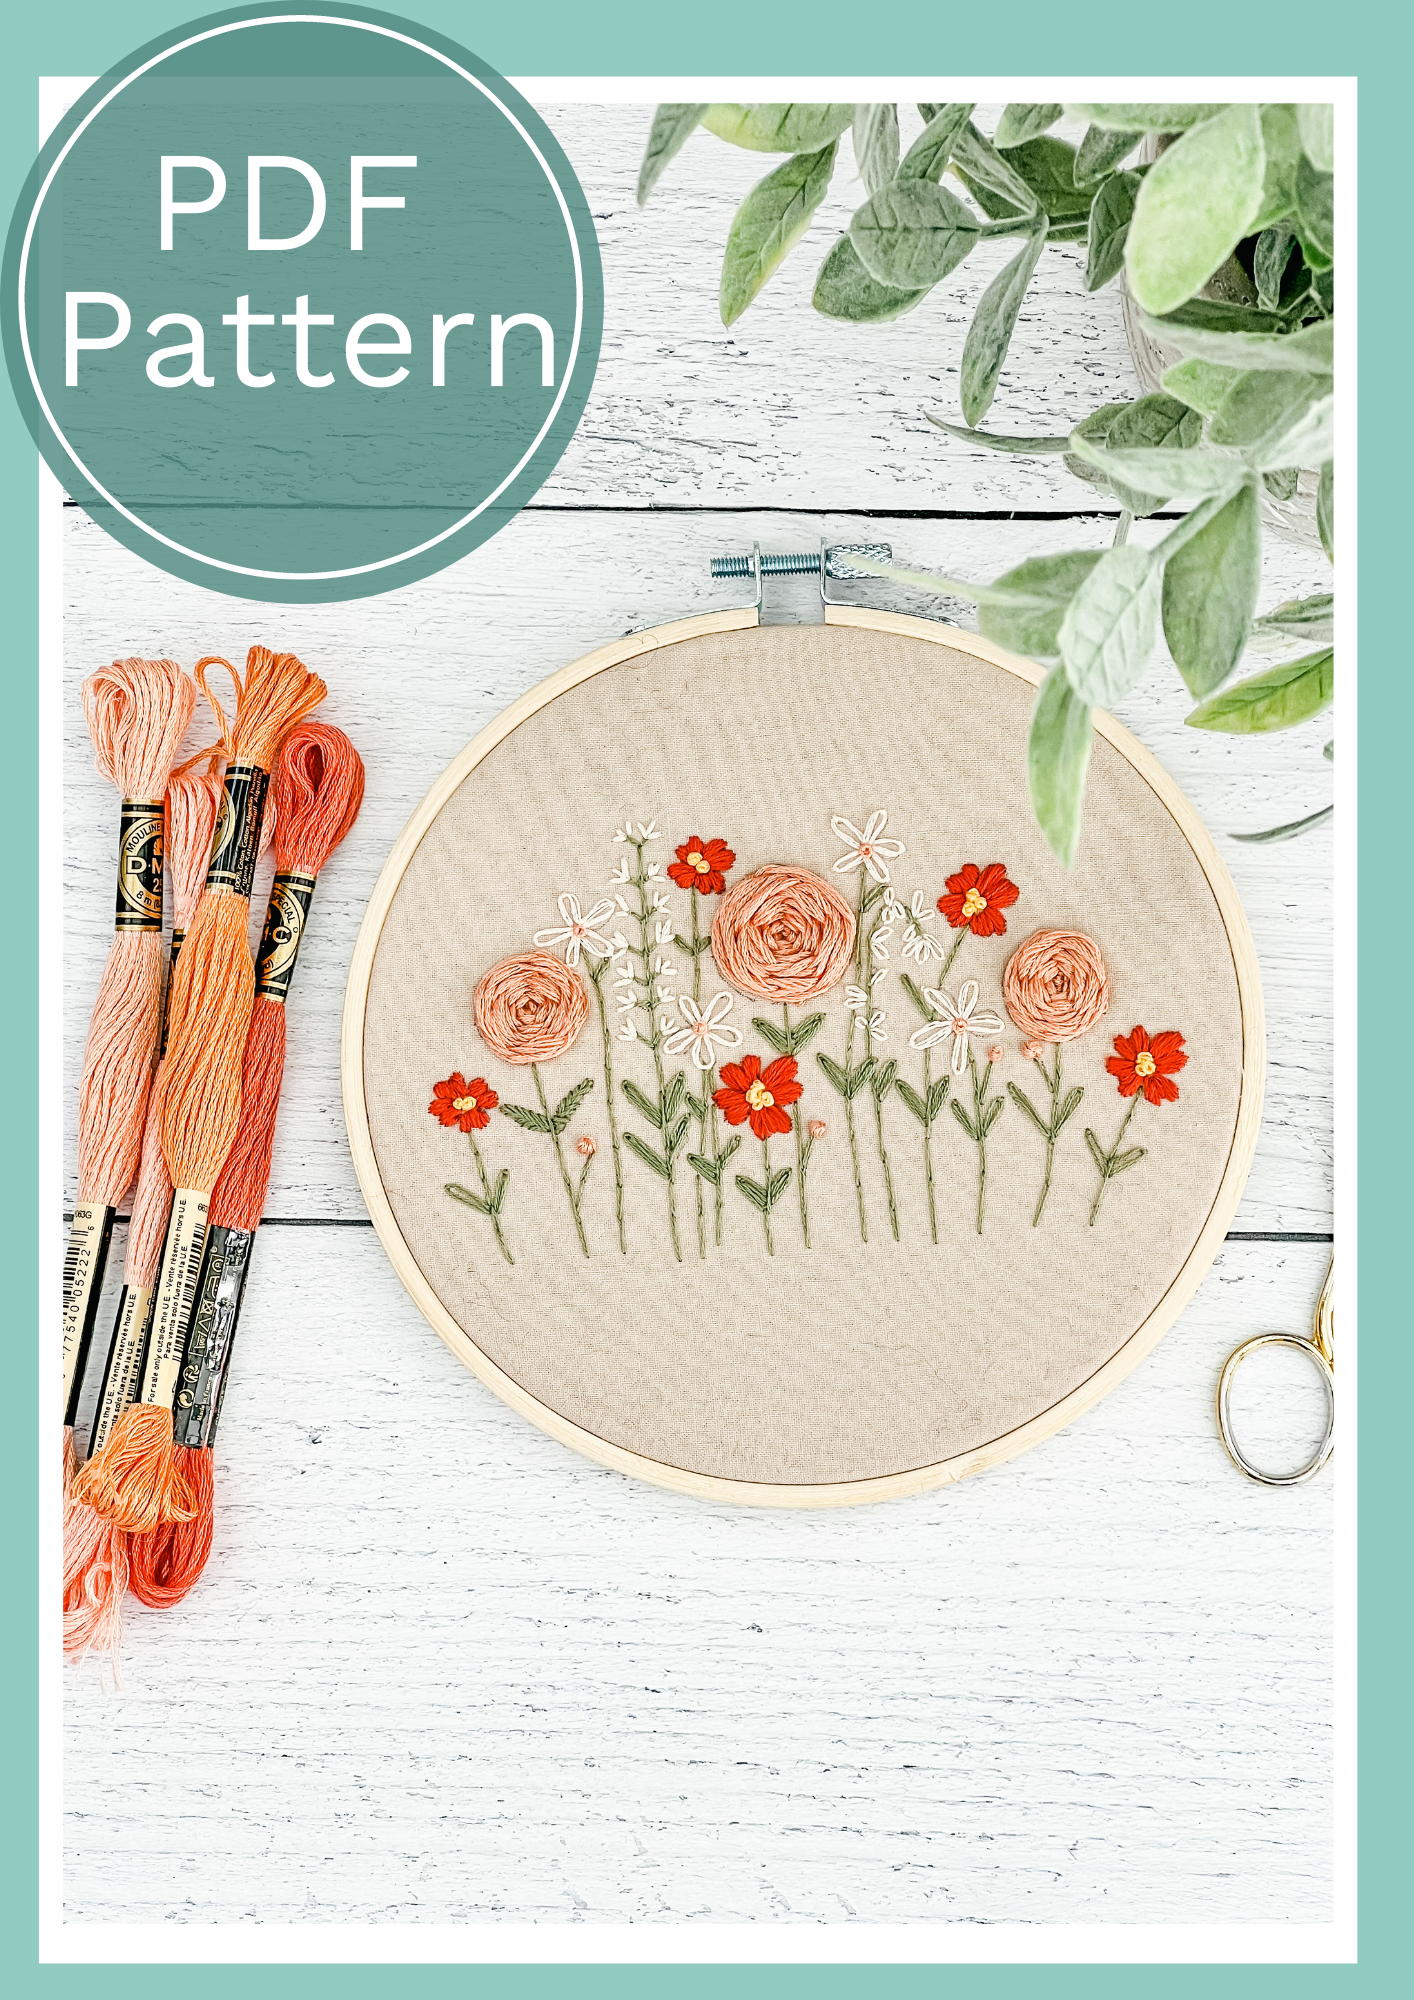 Floral Home Embroidery Hoop Art - Free Embroidery Pattern